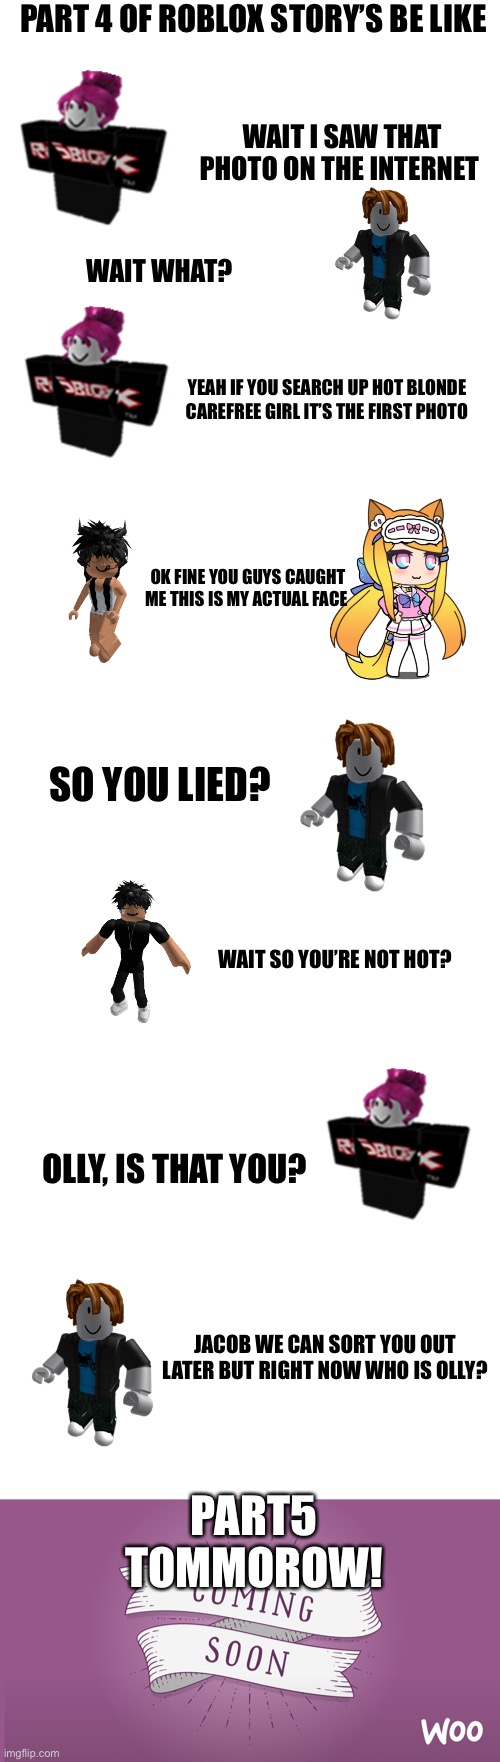 Sorry I didn’t upload yesterday! Part 5 tommorow! | PART 4 OF ROBLOX STORY’S BE LIKE; WAIT I SAW THAT PHOTO ON THE INTERNET; WAIT WHAT? YEAH IF YOU SEARCH UP HOT BLONDE CAREFREE GIRL IT’S THE FIRST PHOTO; OK FINE YOU GUYS CAUGHT ME THIS IS MY ACTUAL FACE; SO YOU LIED? WAIT SO YOU’RE NOT HOT? OLLY, IS THAT YOU? JACOB WE CAN SORT YOU OUT LATER BUT RIGHT NOW WHO IS OLLY? PART5 TOMMOROW! | image tagged in blank white template,coming soon | made w/ Imgflip meme maker